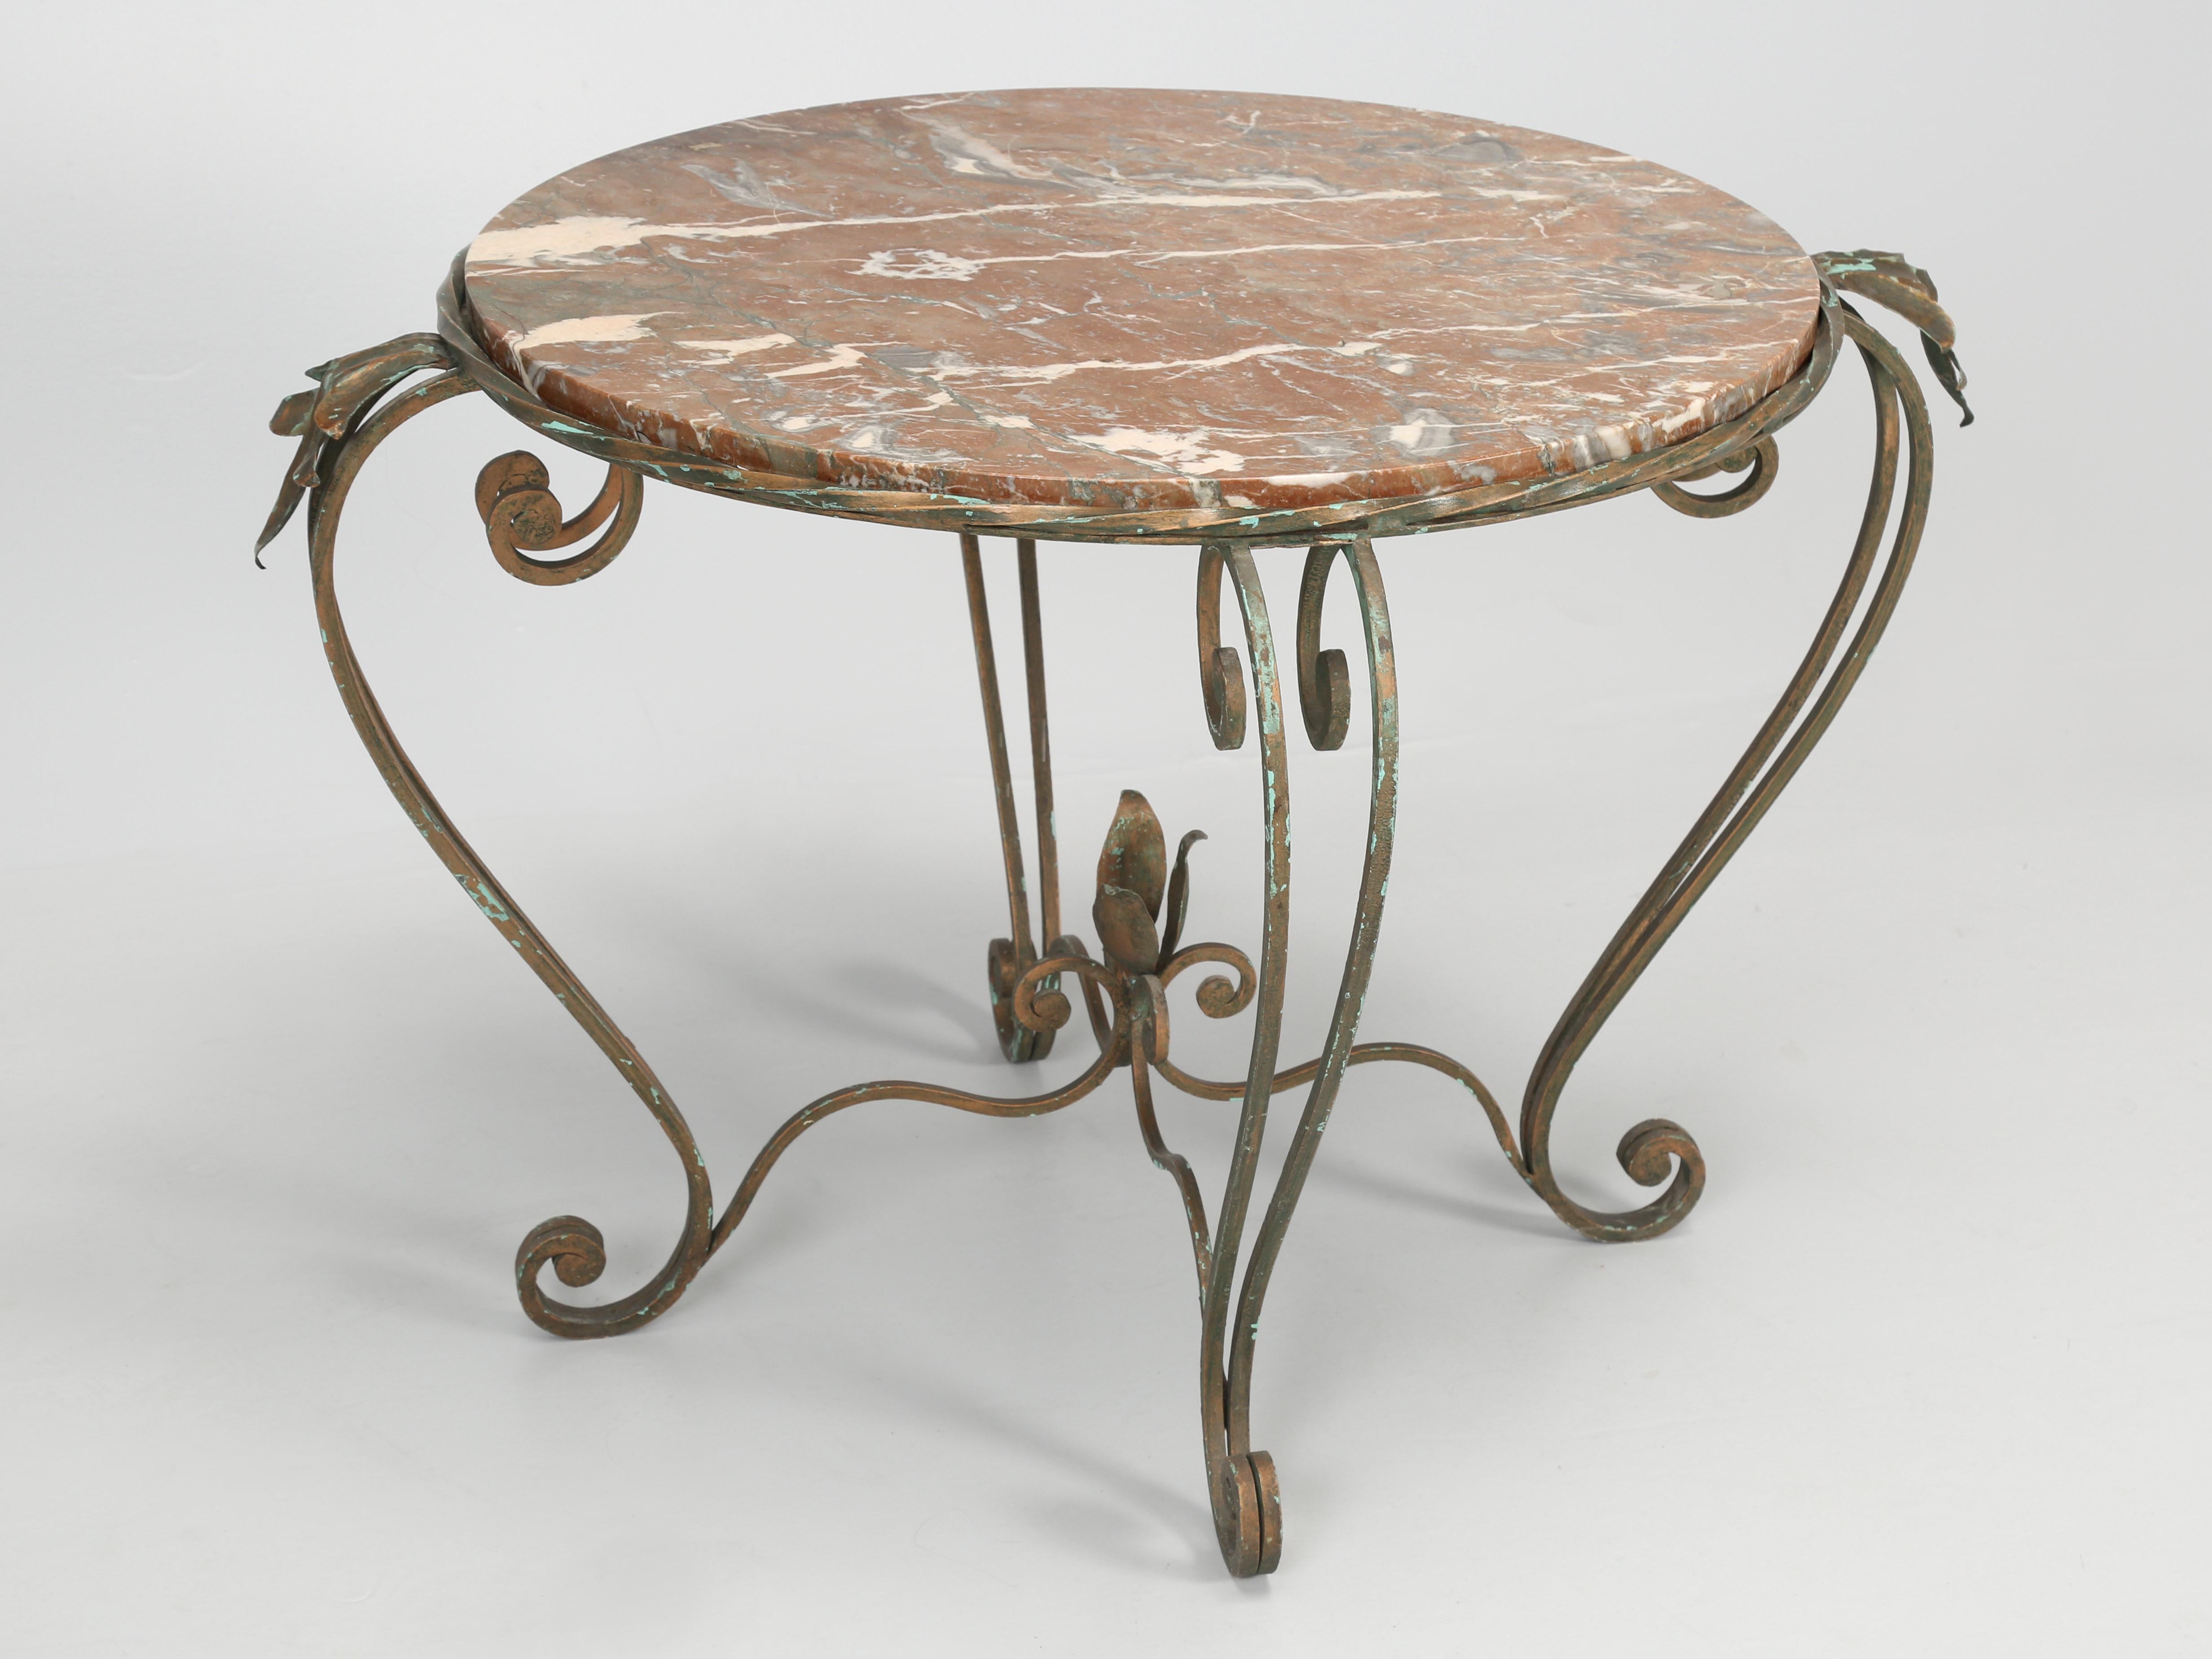 Vintage French hand-made wrought iron and marble side table or end table and possibly could be used as a coffee table. What is so great about this vintage French round side table is the finish. Our best hypothesis thinks it’s a cold plated bronze